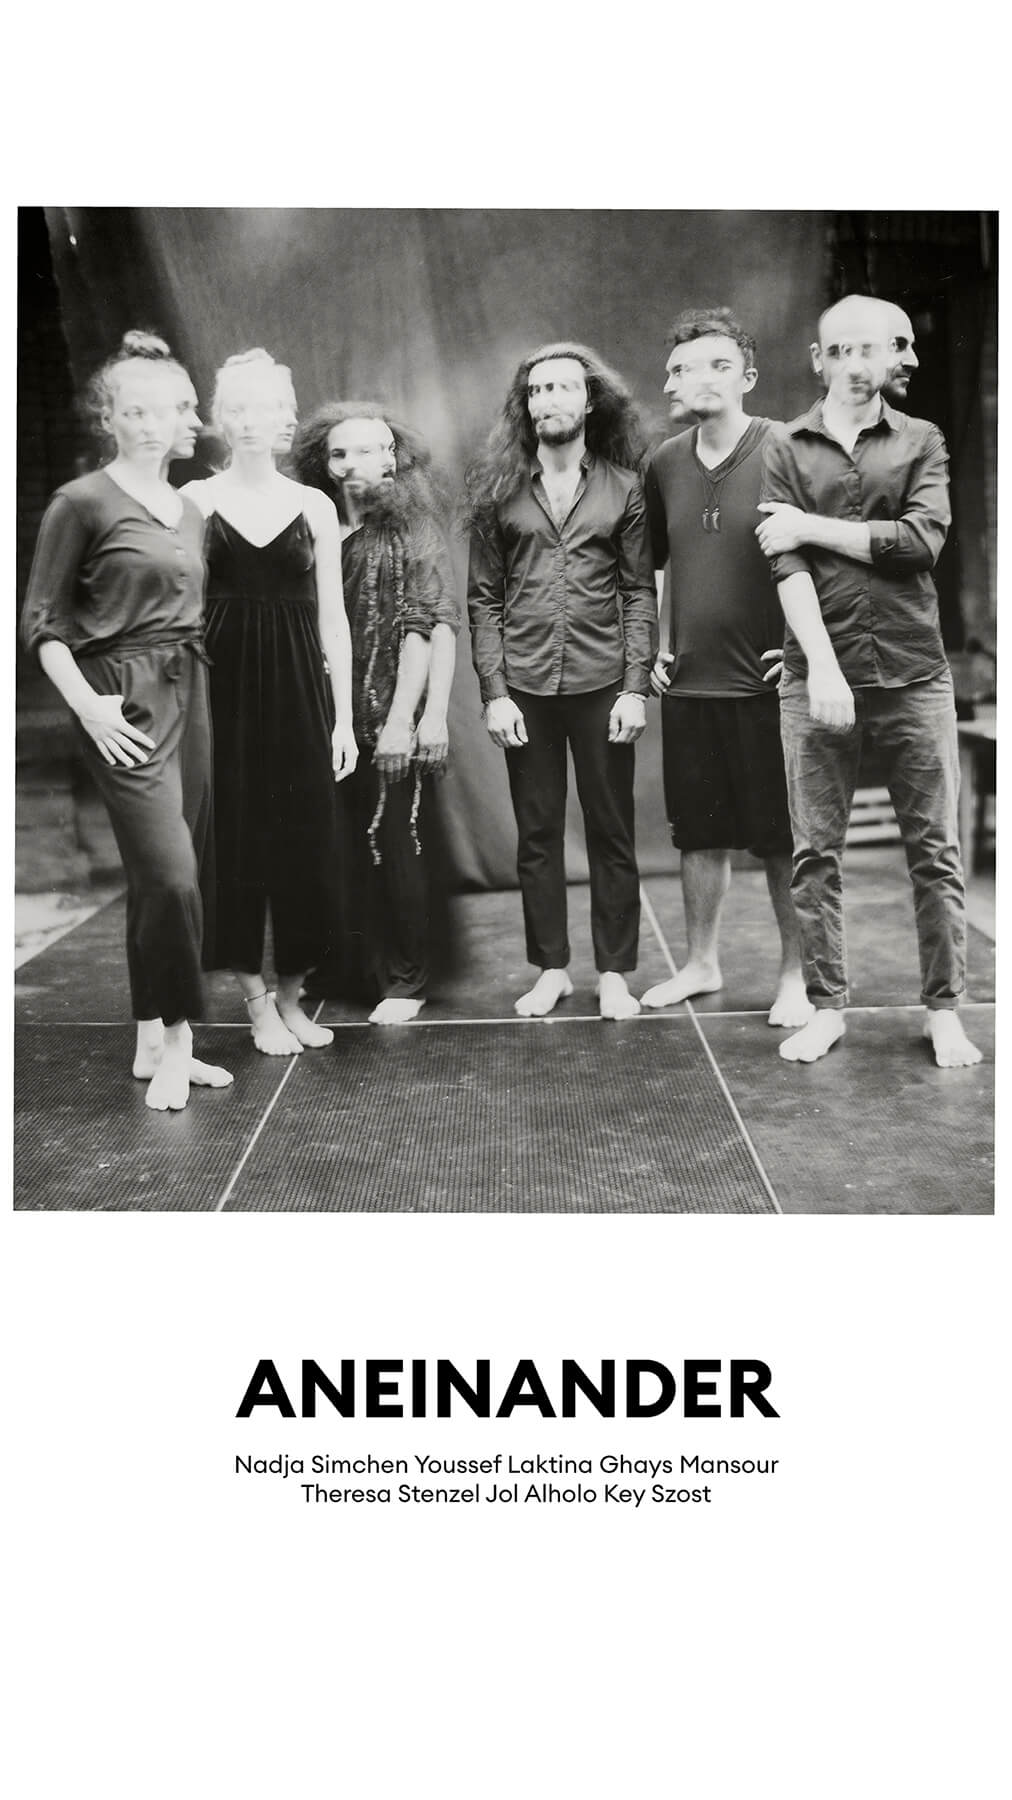 Dance & Music Project "Aneinander"